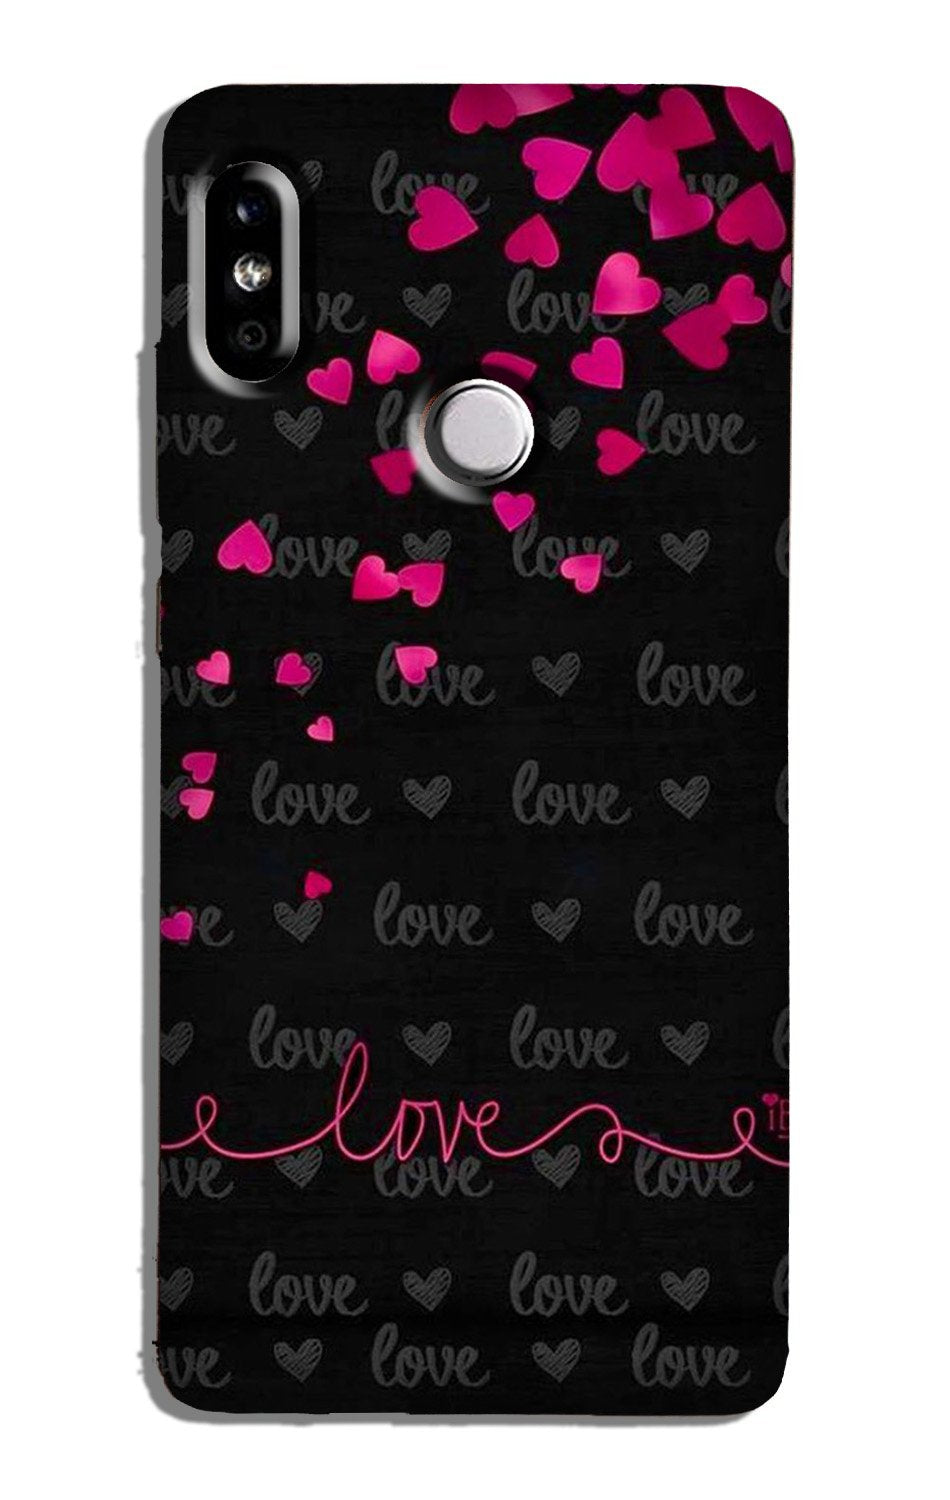 Love in Air Case for Redmi Note 5 Pro